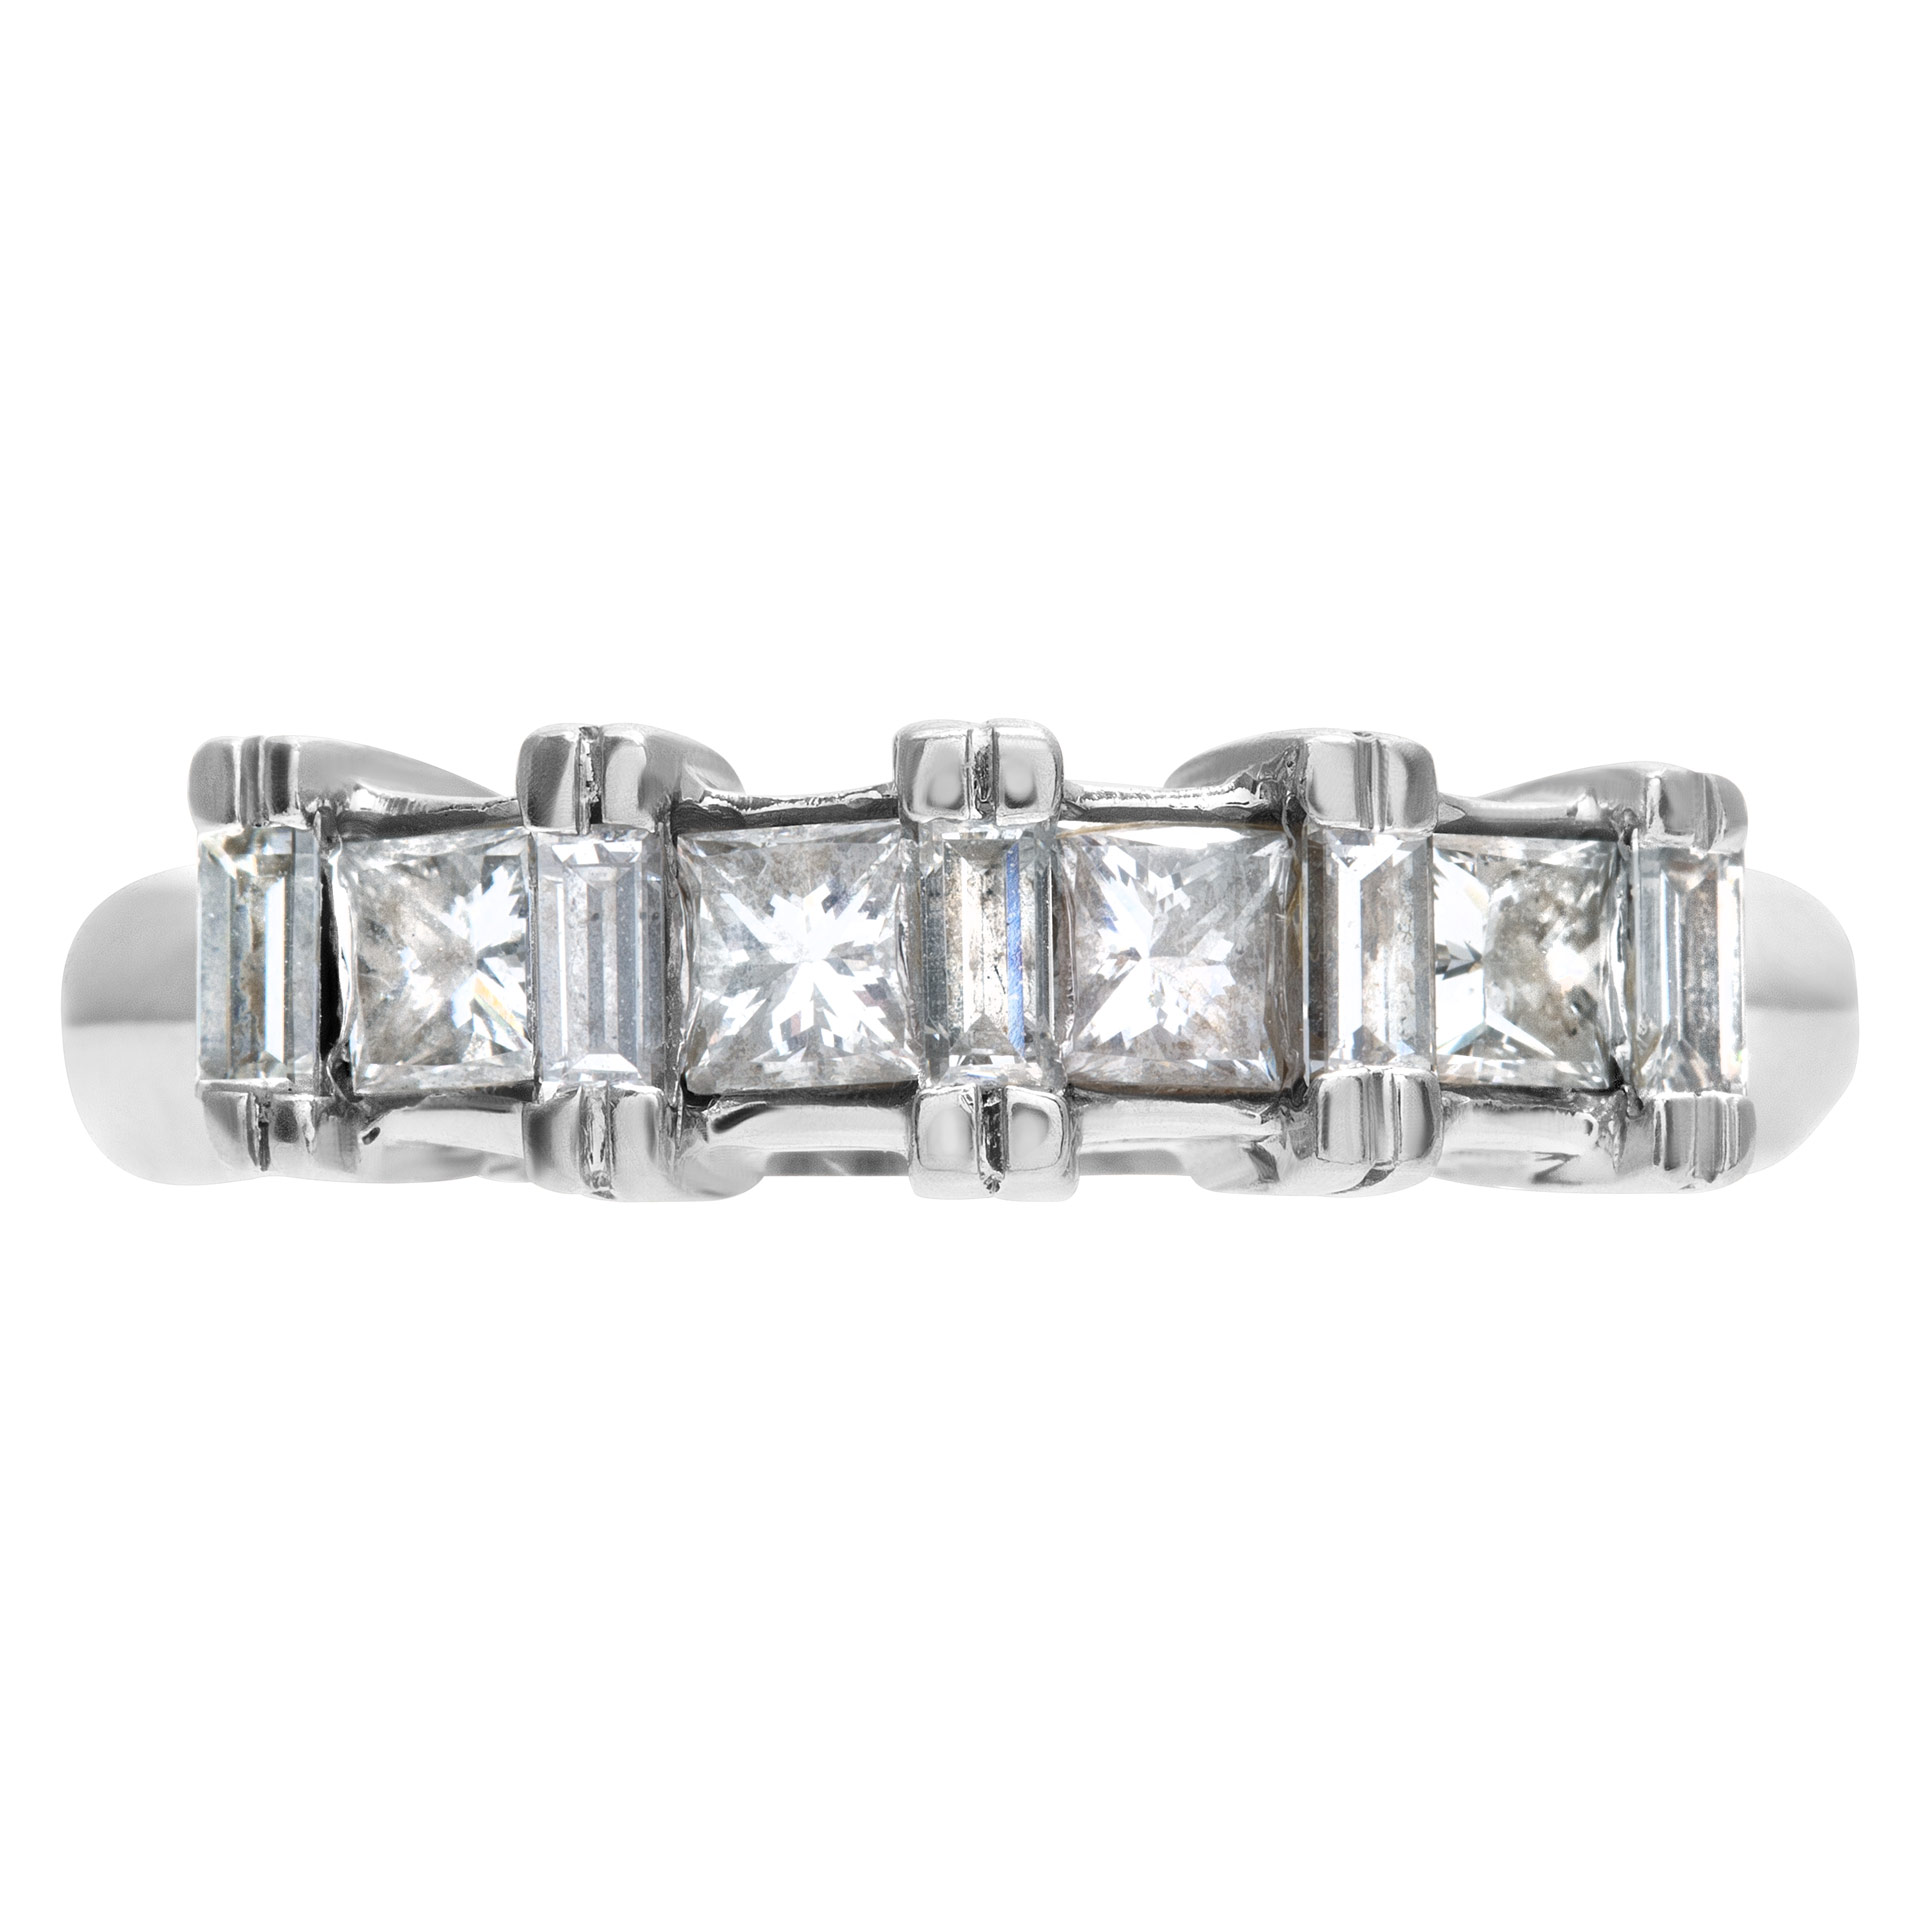 Fancy 14k white gold Ring with 0.85 cts of princess cut diamonds and baguettes.